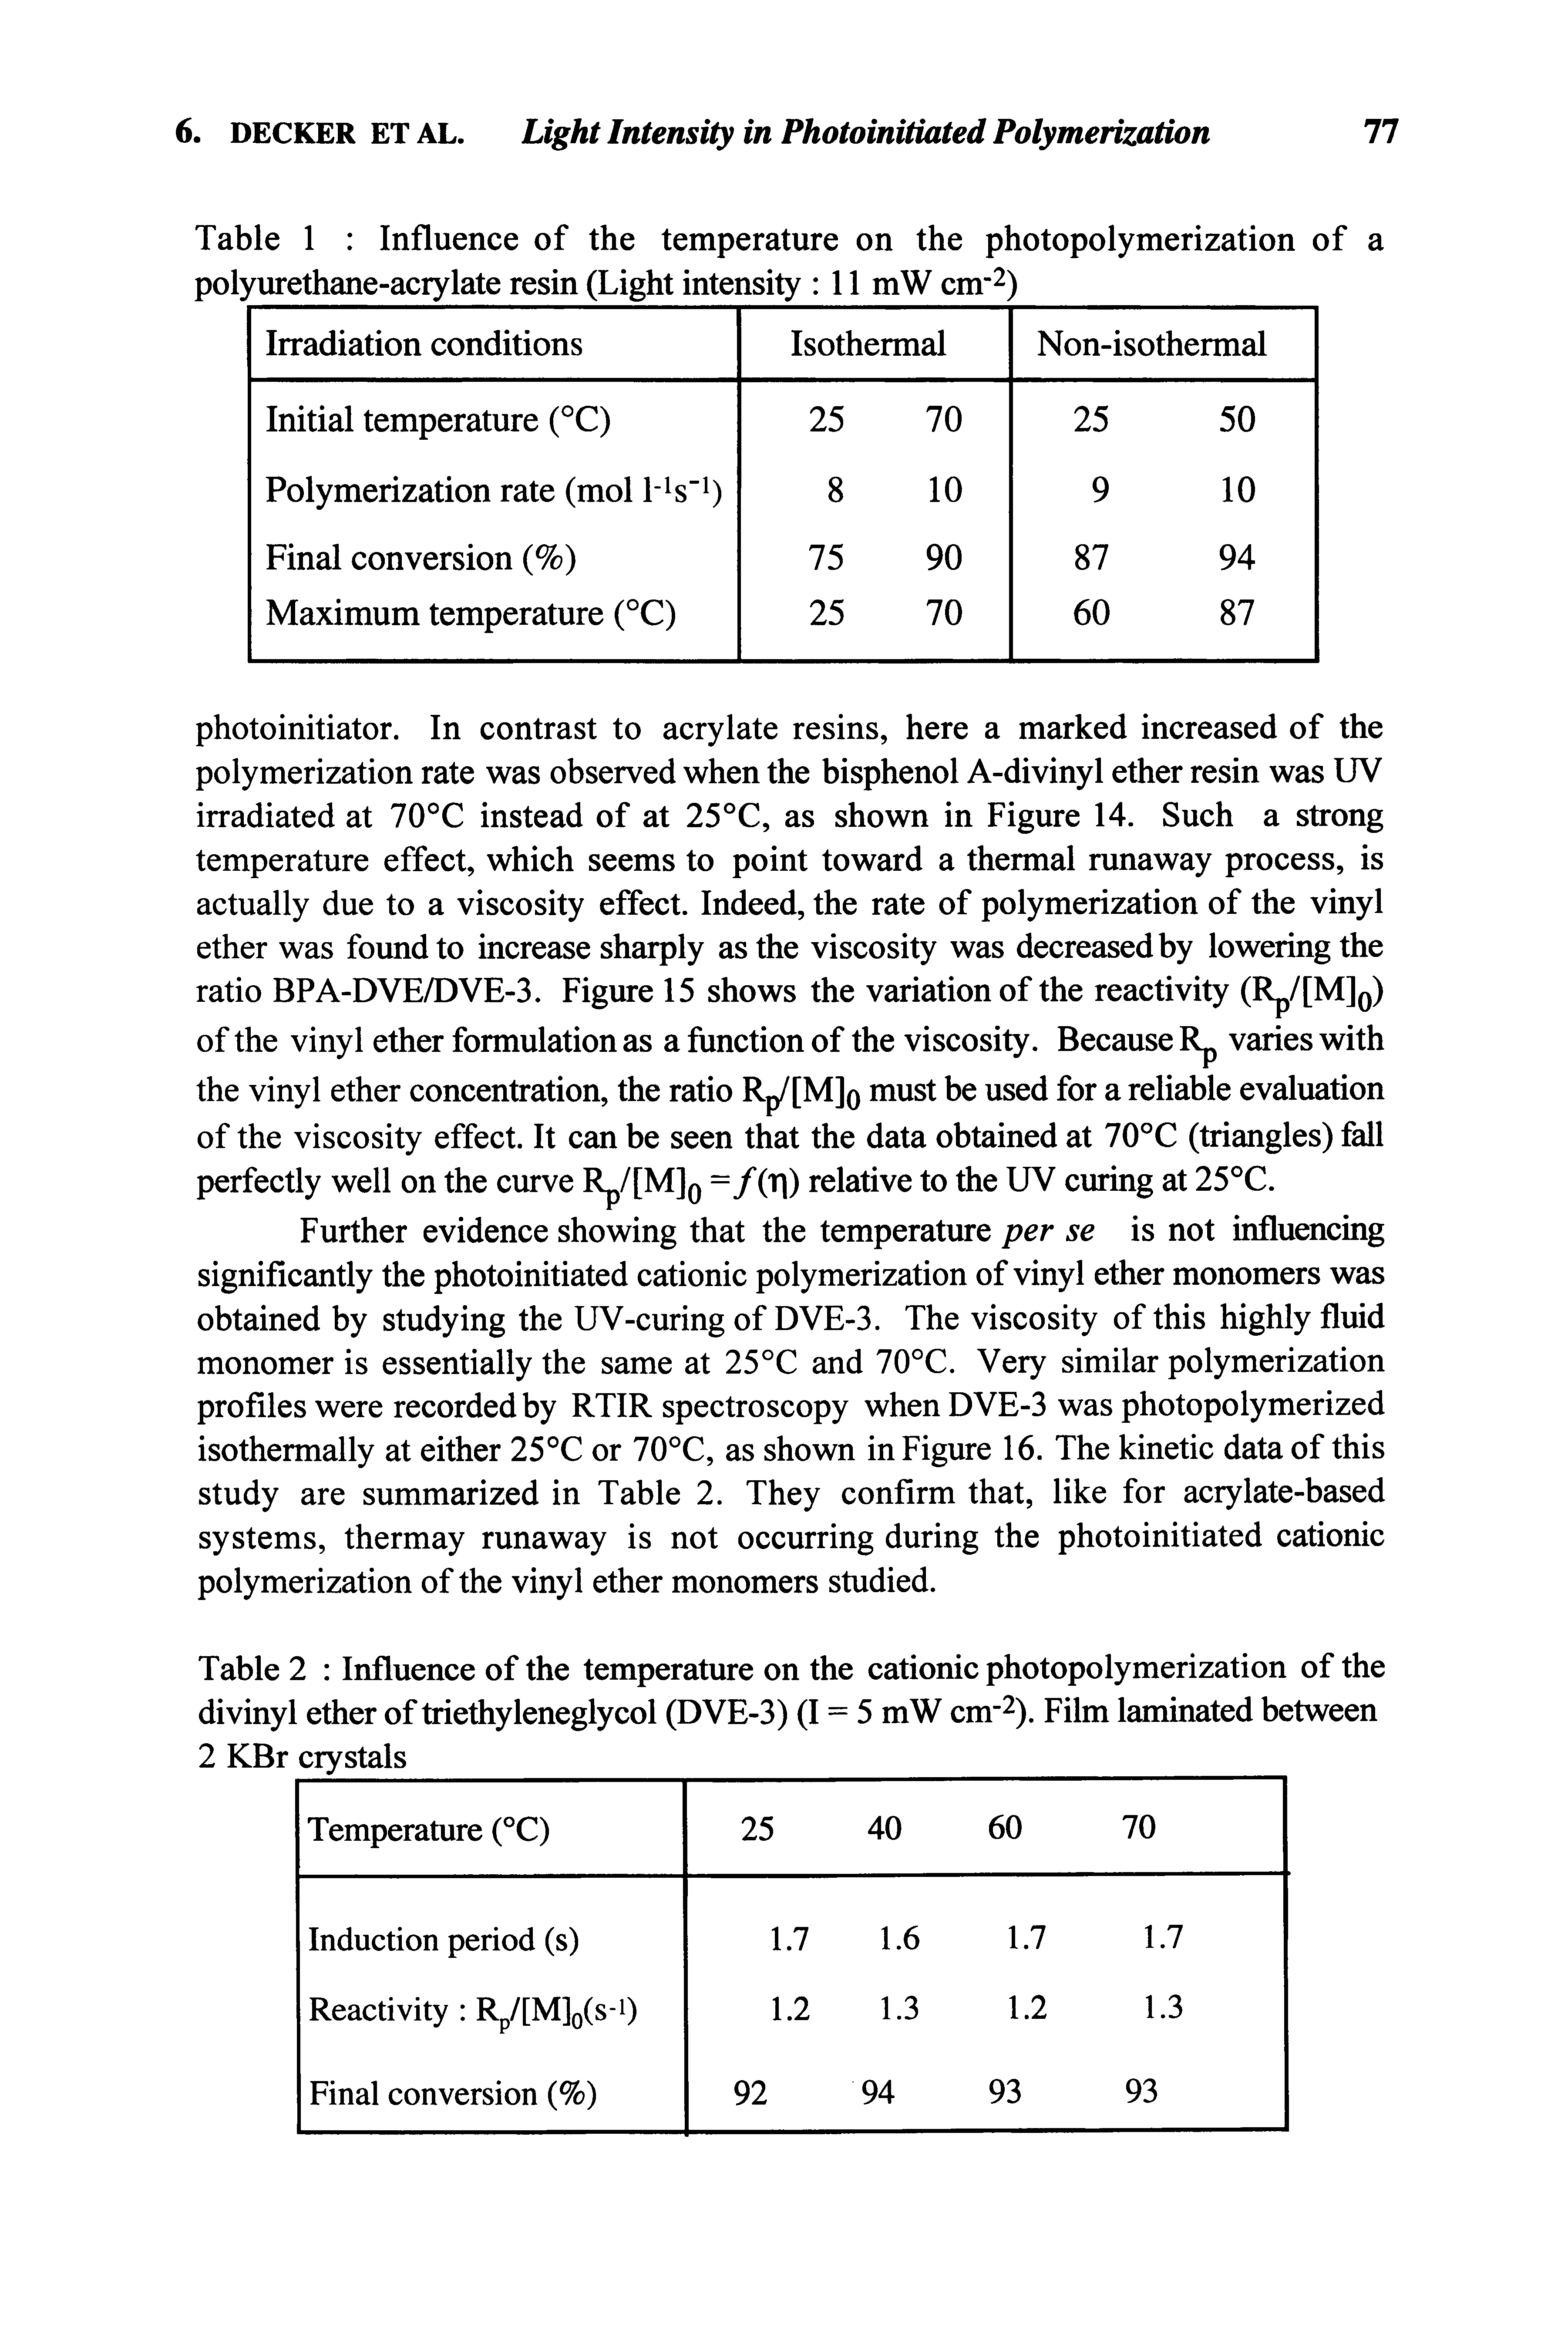 Table 2 Influence of the temperature on the cationic photopolymerization of the divinyl ether of triethyleneglycol (DVE-3) (1 = 5 mW cm-2). Film laminated between 2 KBr crystals ...